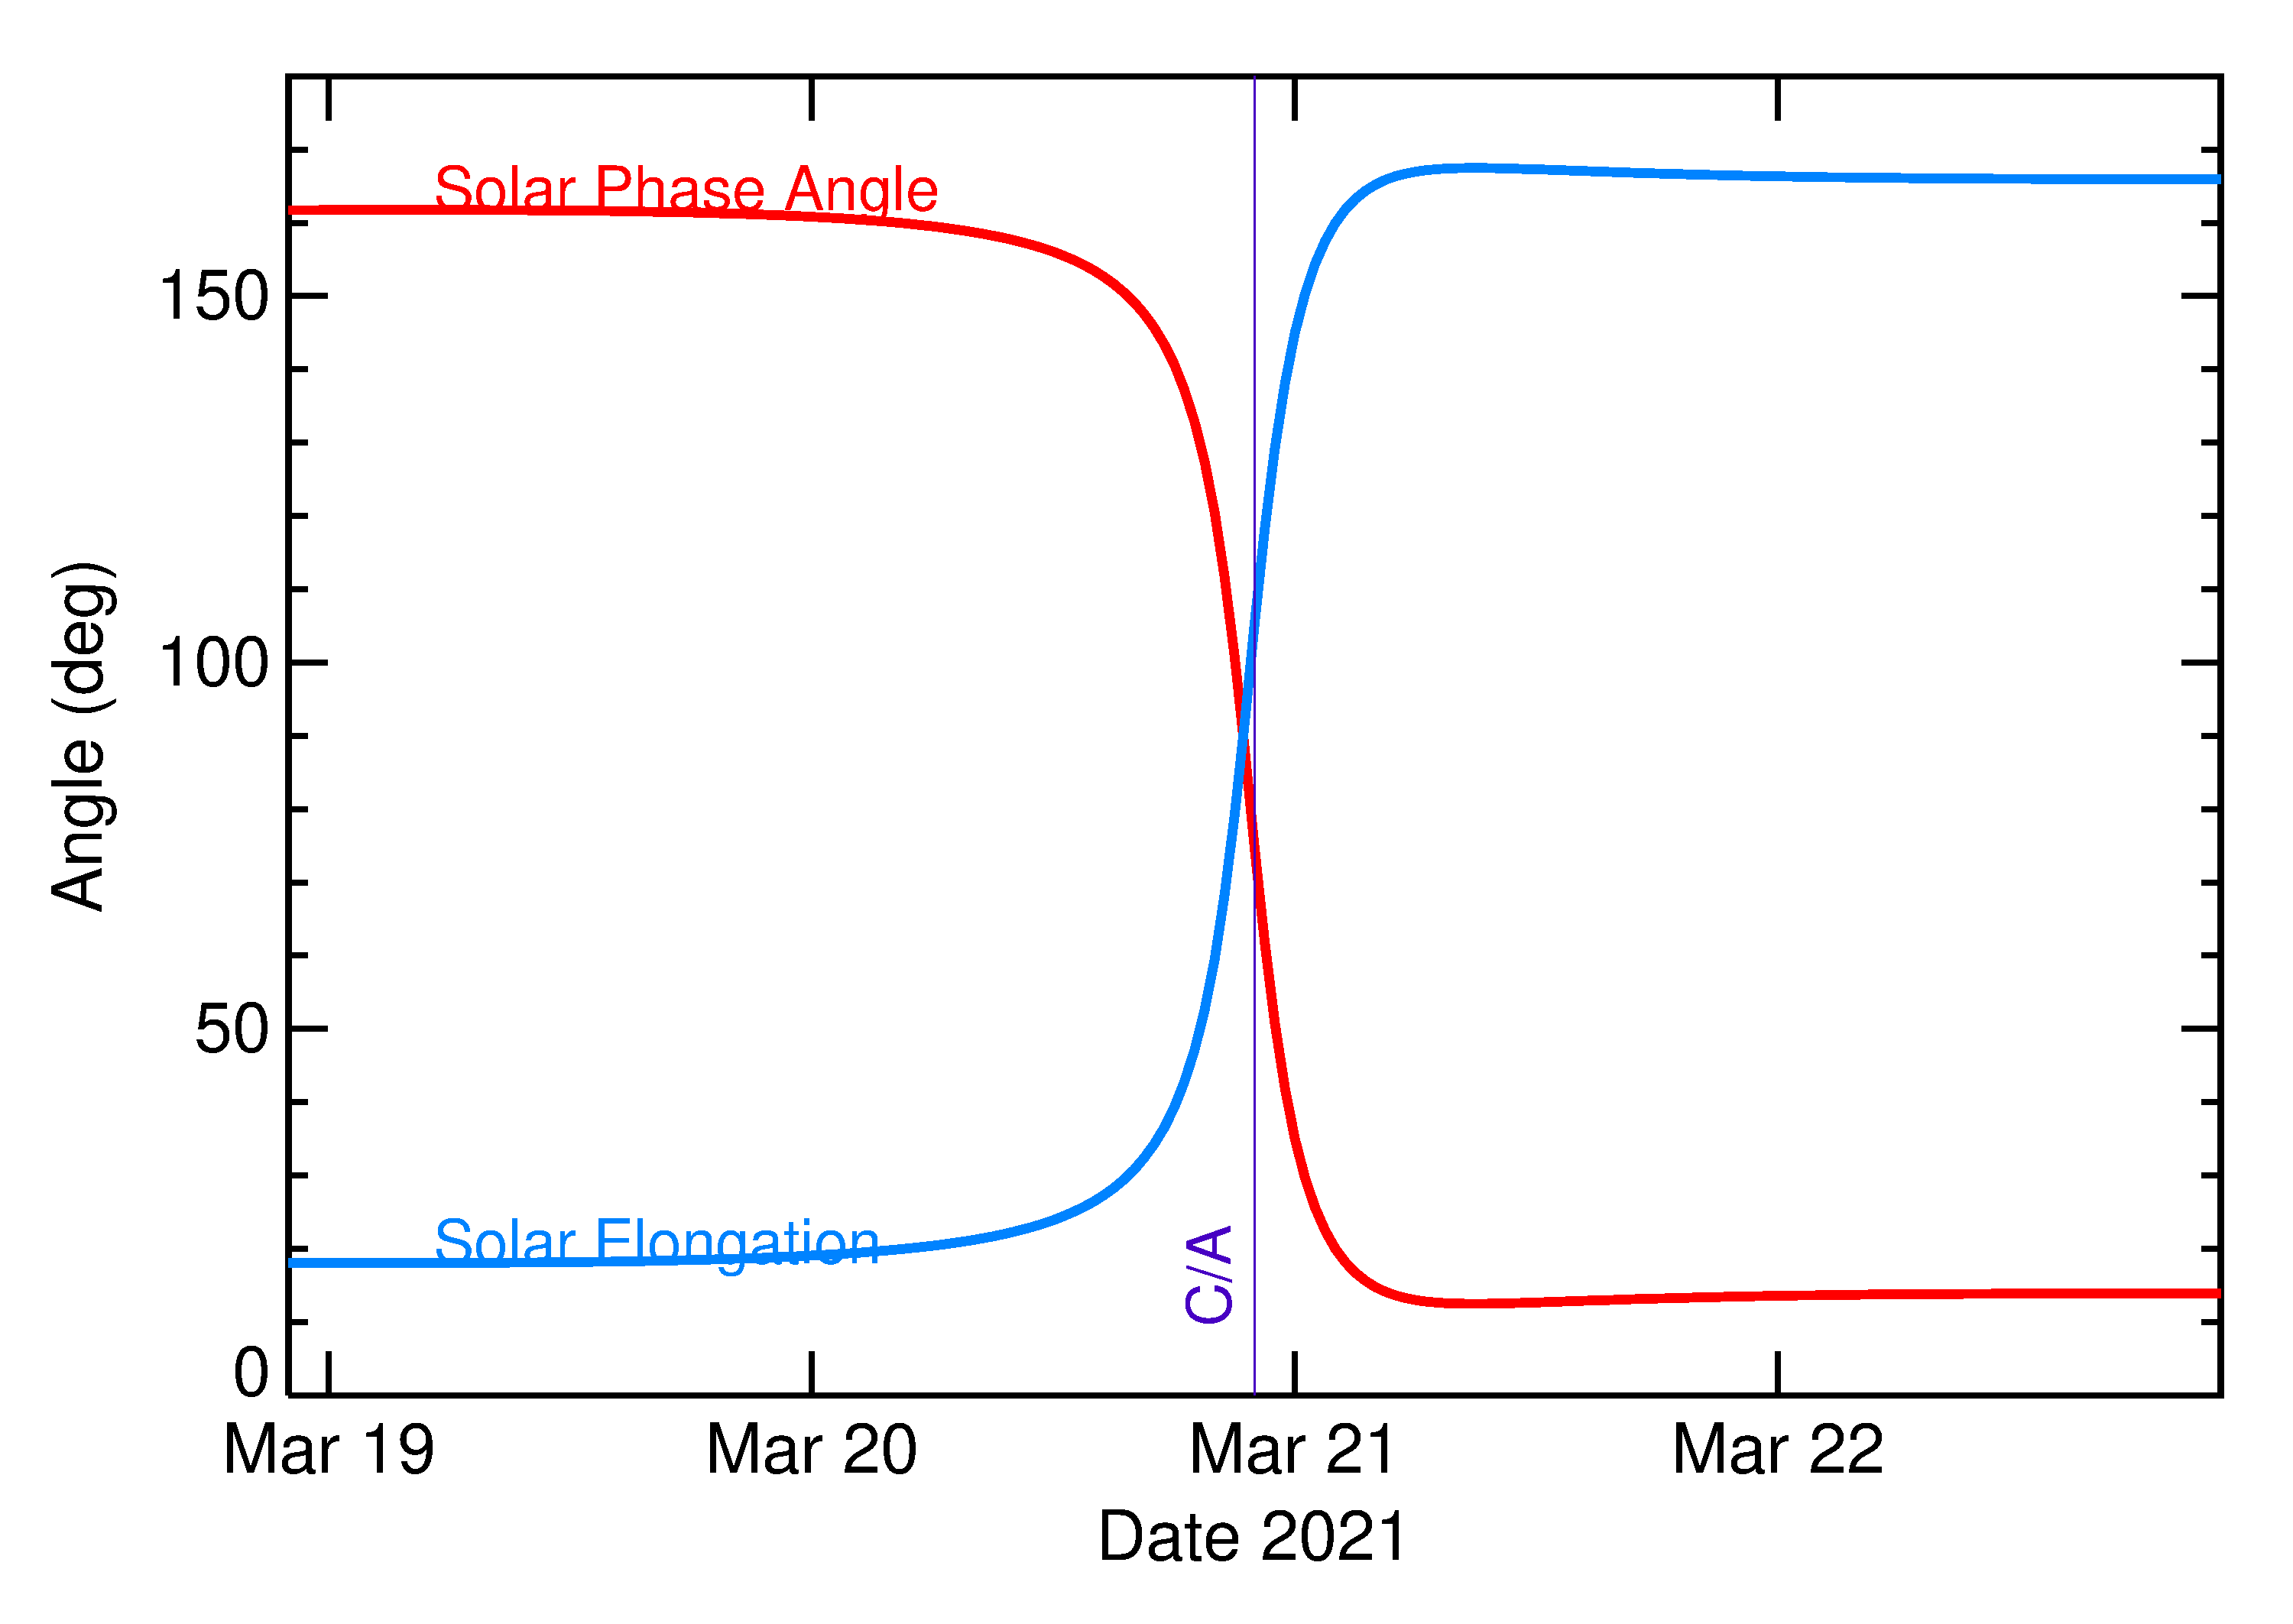 Solar Elongation and Solar Phase Angle of 2021 FM2 in the days around closest approach